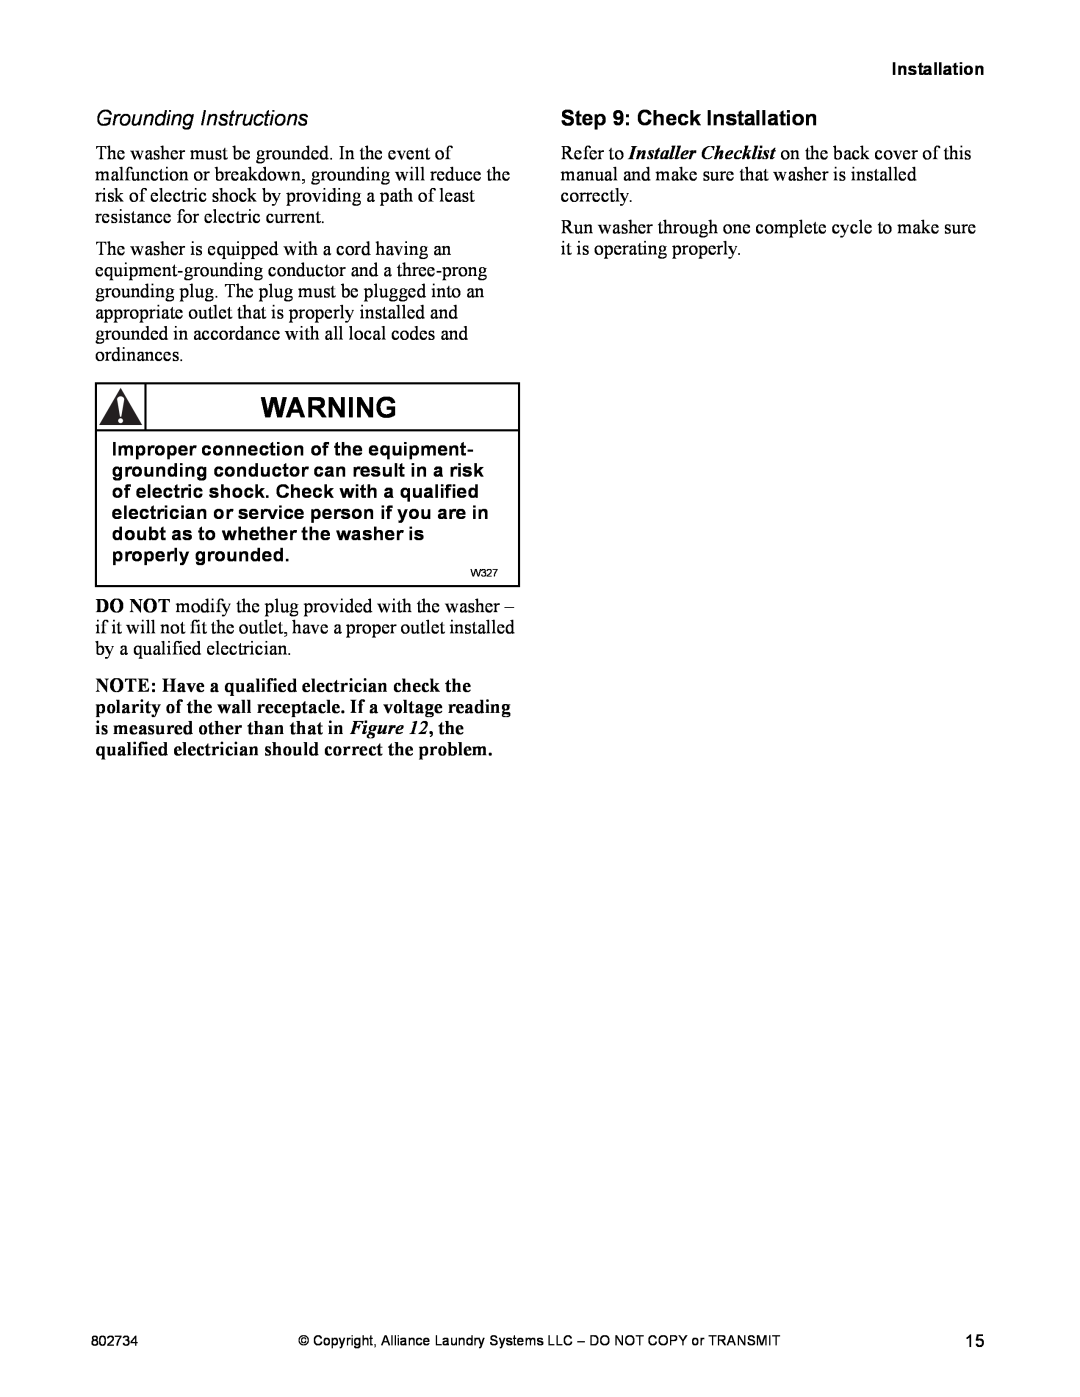 Alliance Laundry Systems FLW1526C manual Grounding Instructions, Check Installation 